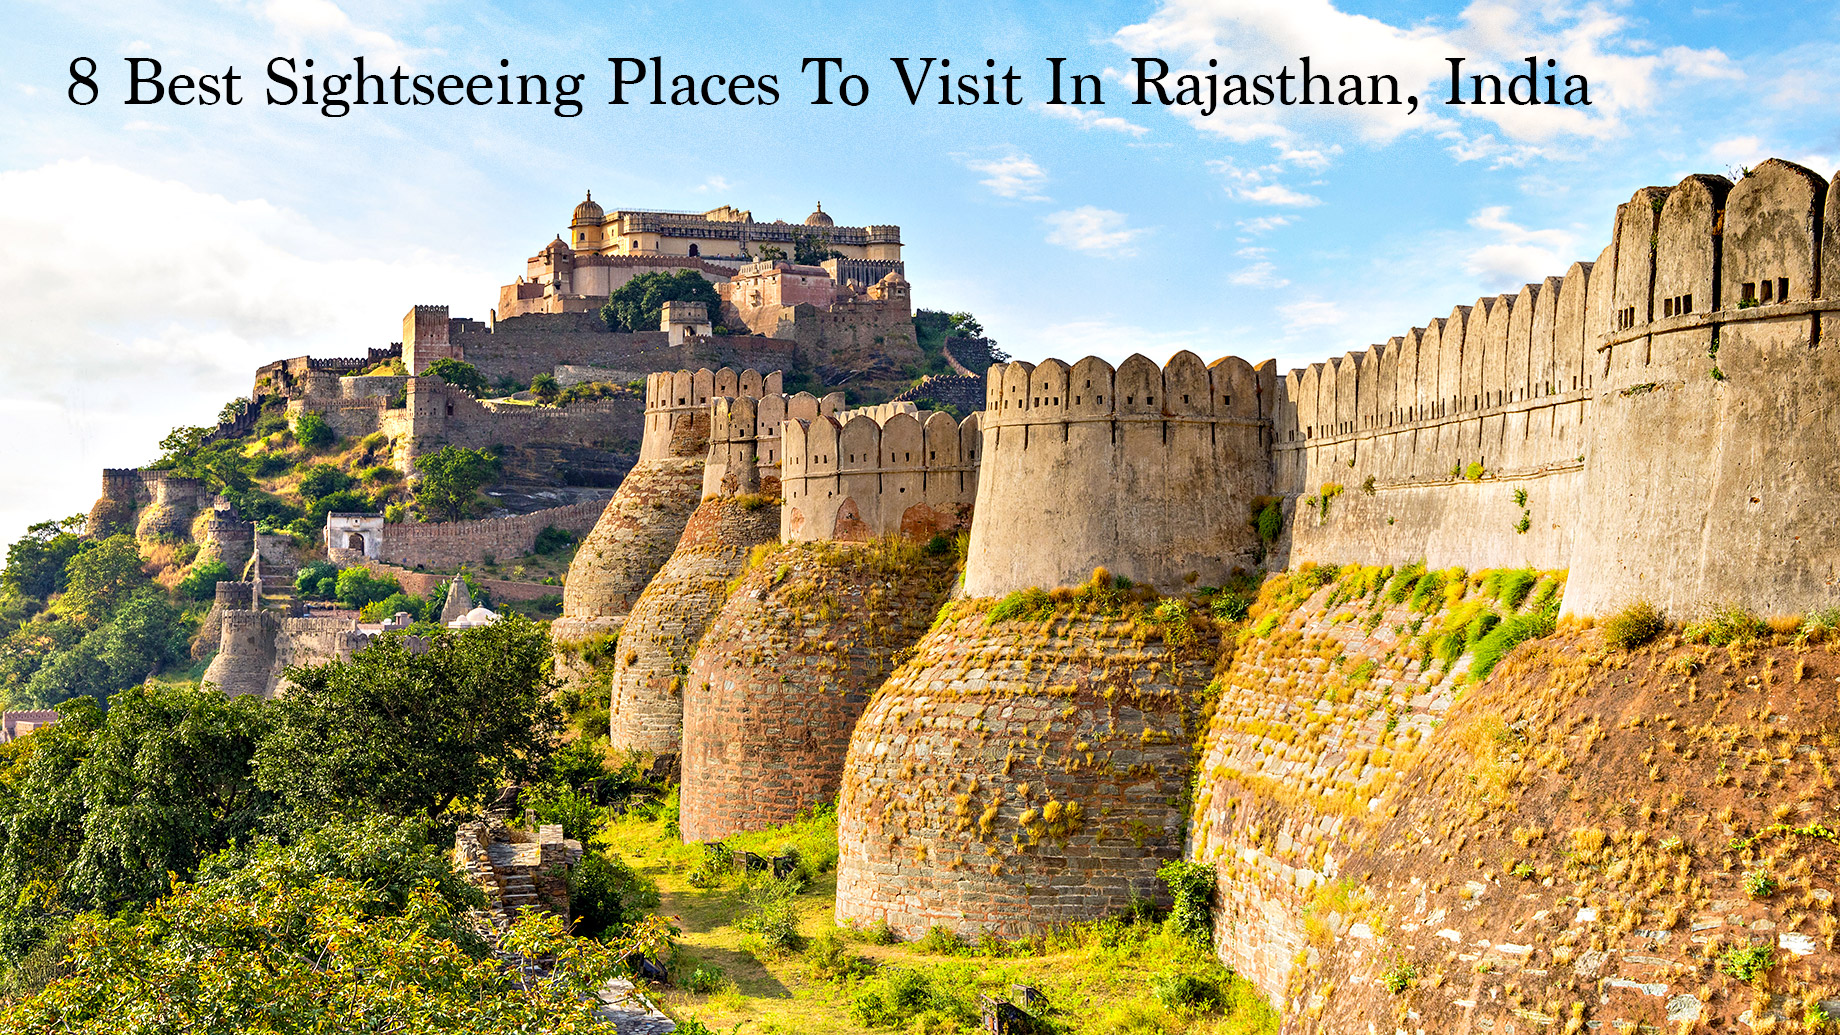 8 Best Sightseeing Places To Visit In Rajasthan, India